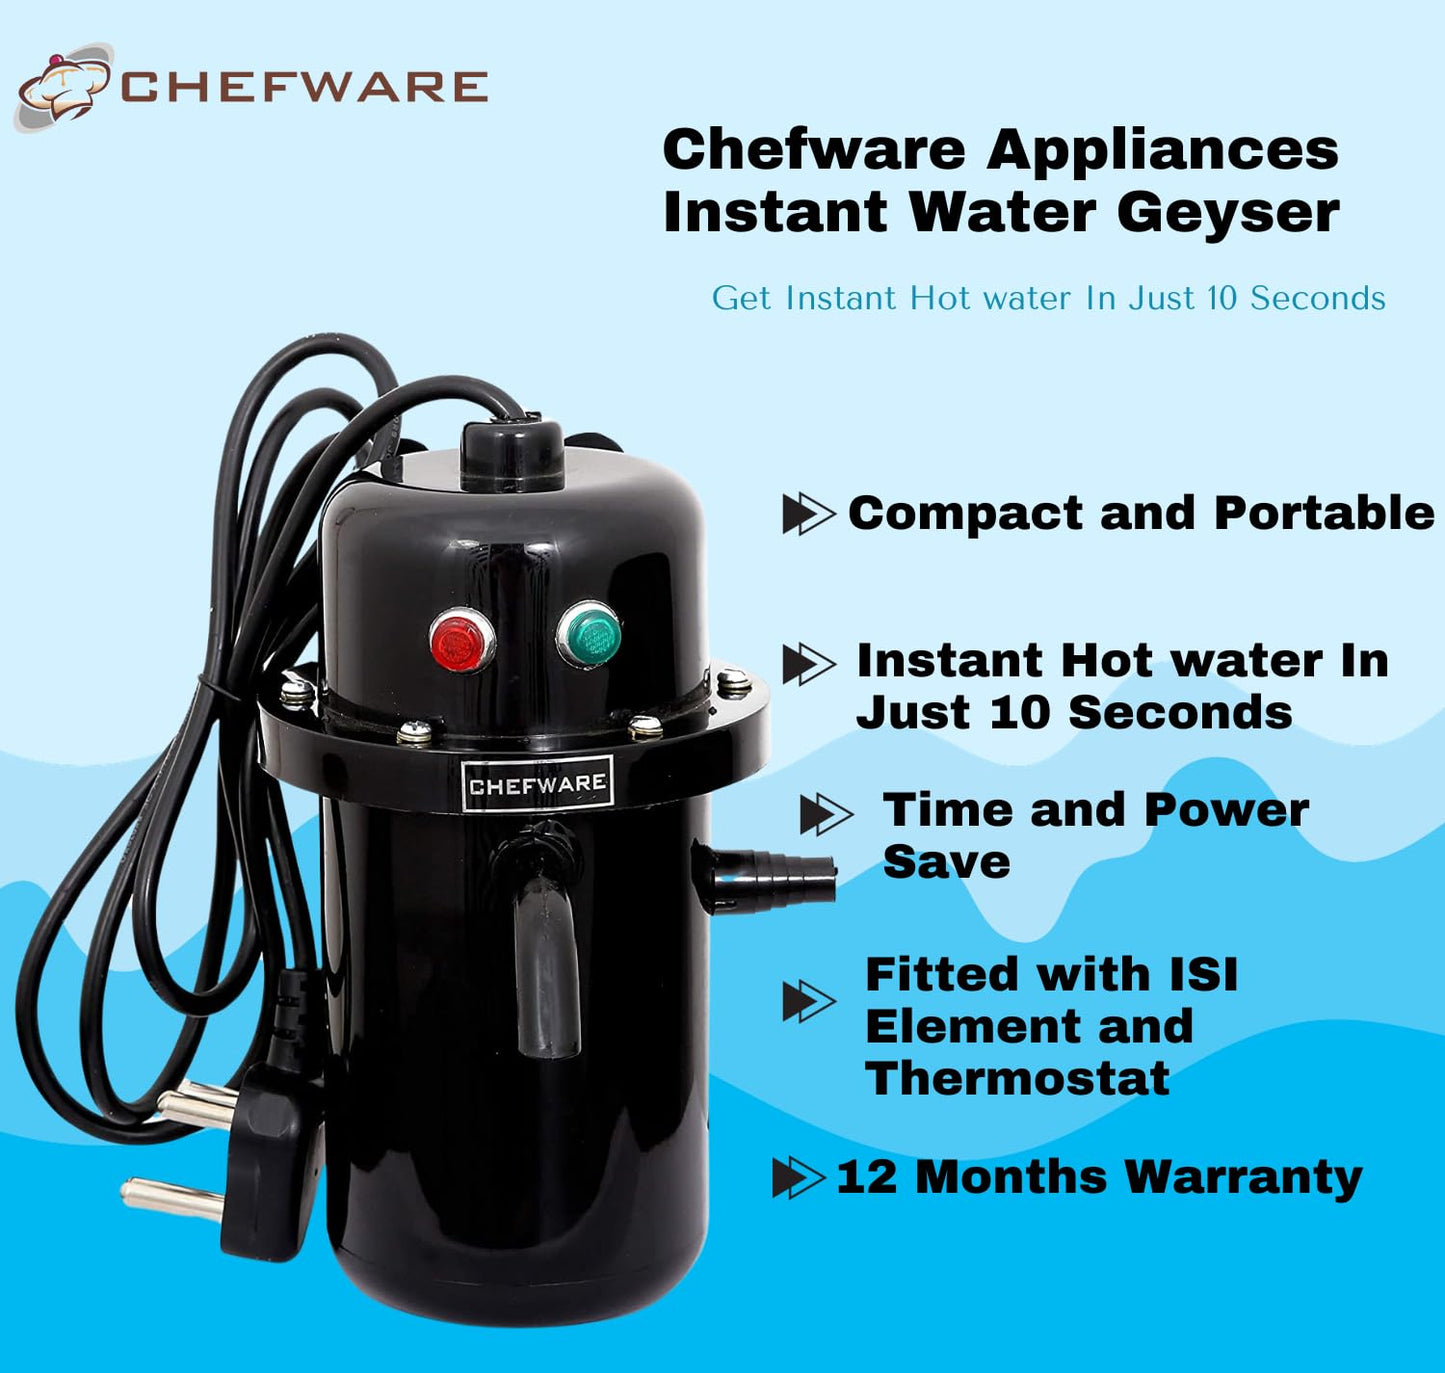 Chefware Appliances Instant portable water heater/geyser for use home, office, restaurant, labs, clinics, saloon, beauty parlor